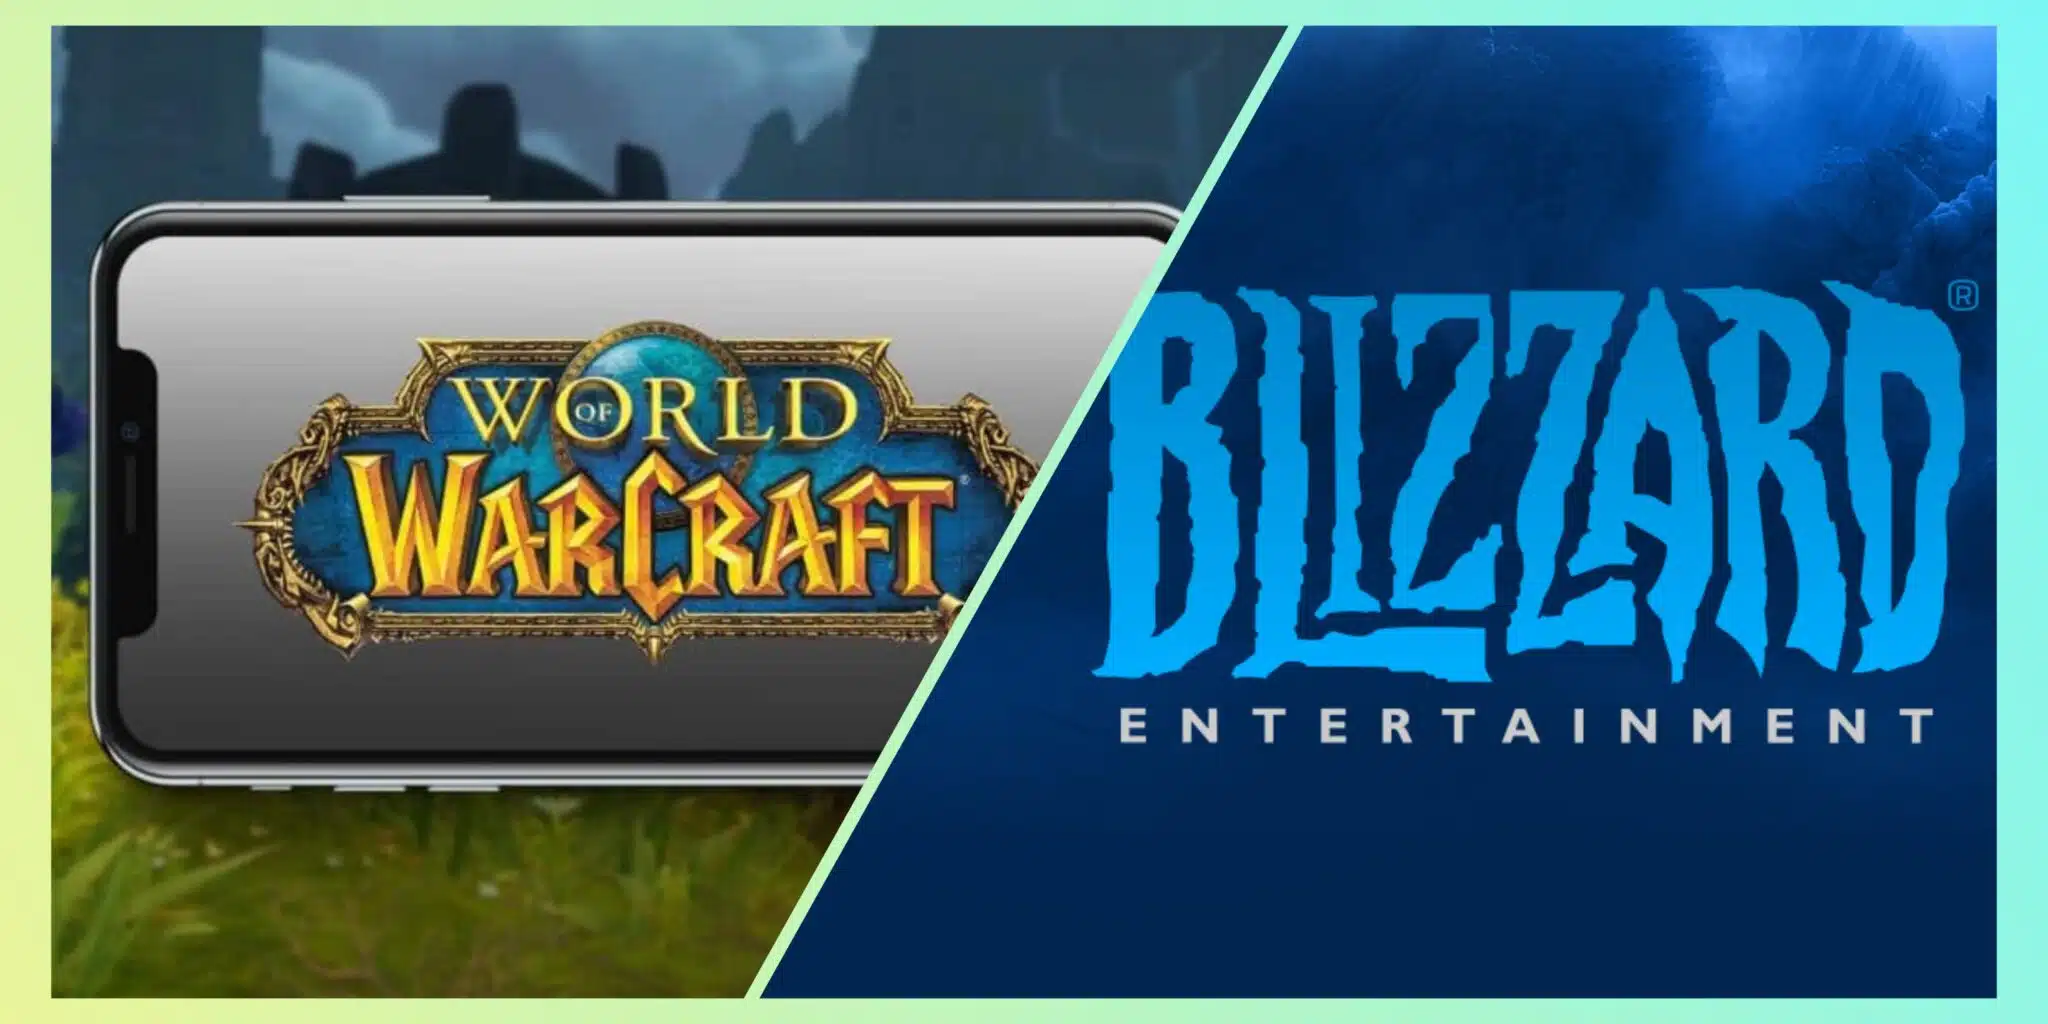 Blizzard’s Bold Move: Warcraft Goes Mobile, Stirring Gamer Expectations